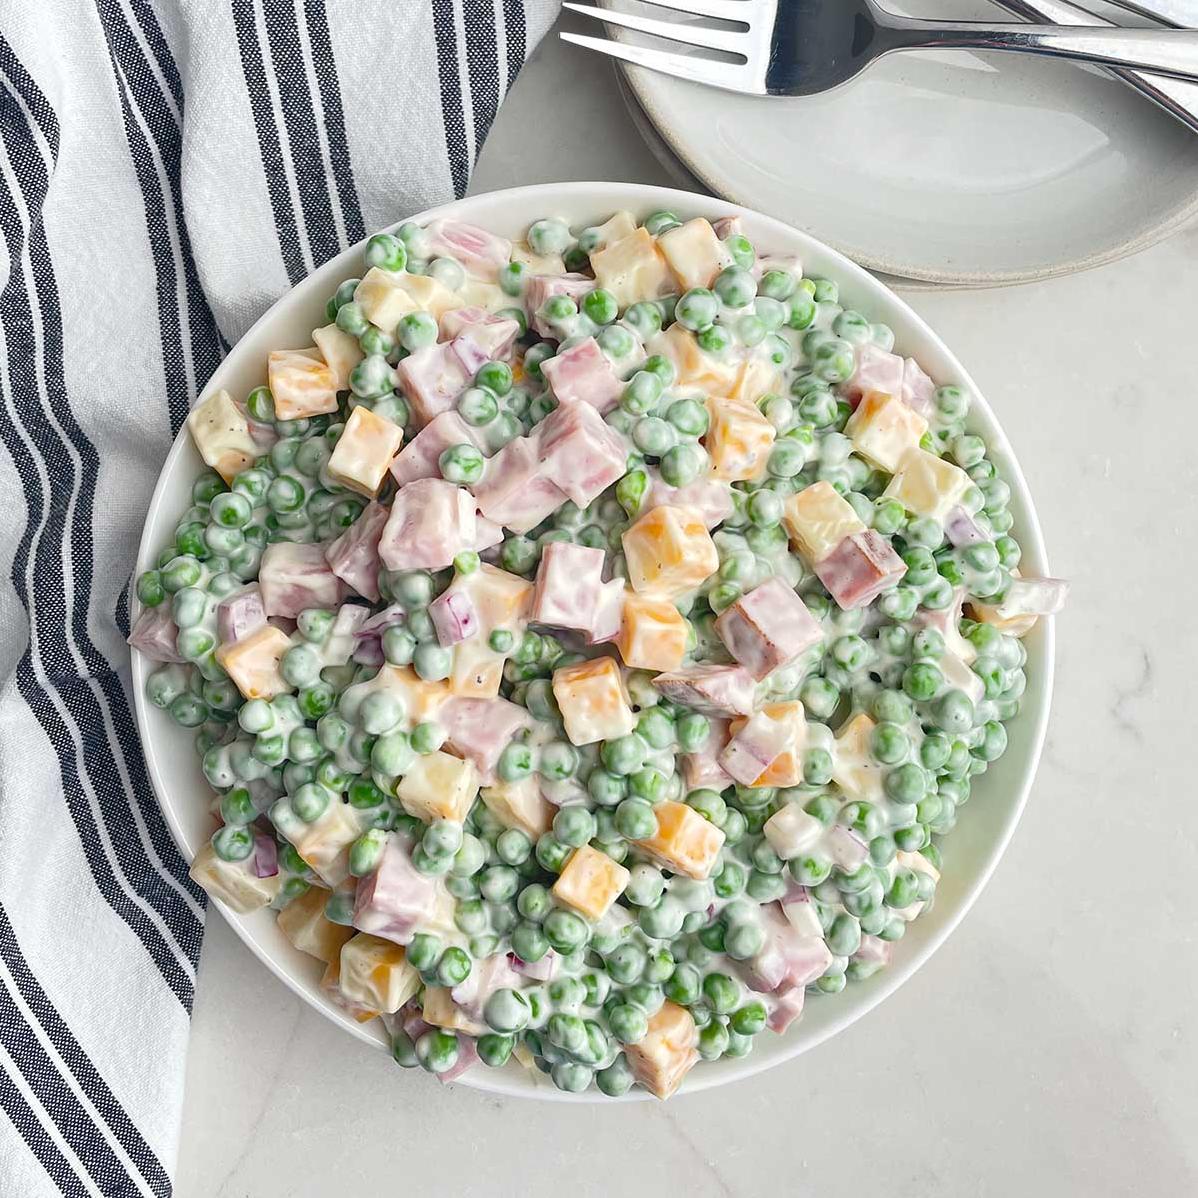  This is not your ordinary salad - our English pea salad is simply delicious 🤤👍